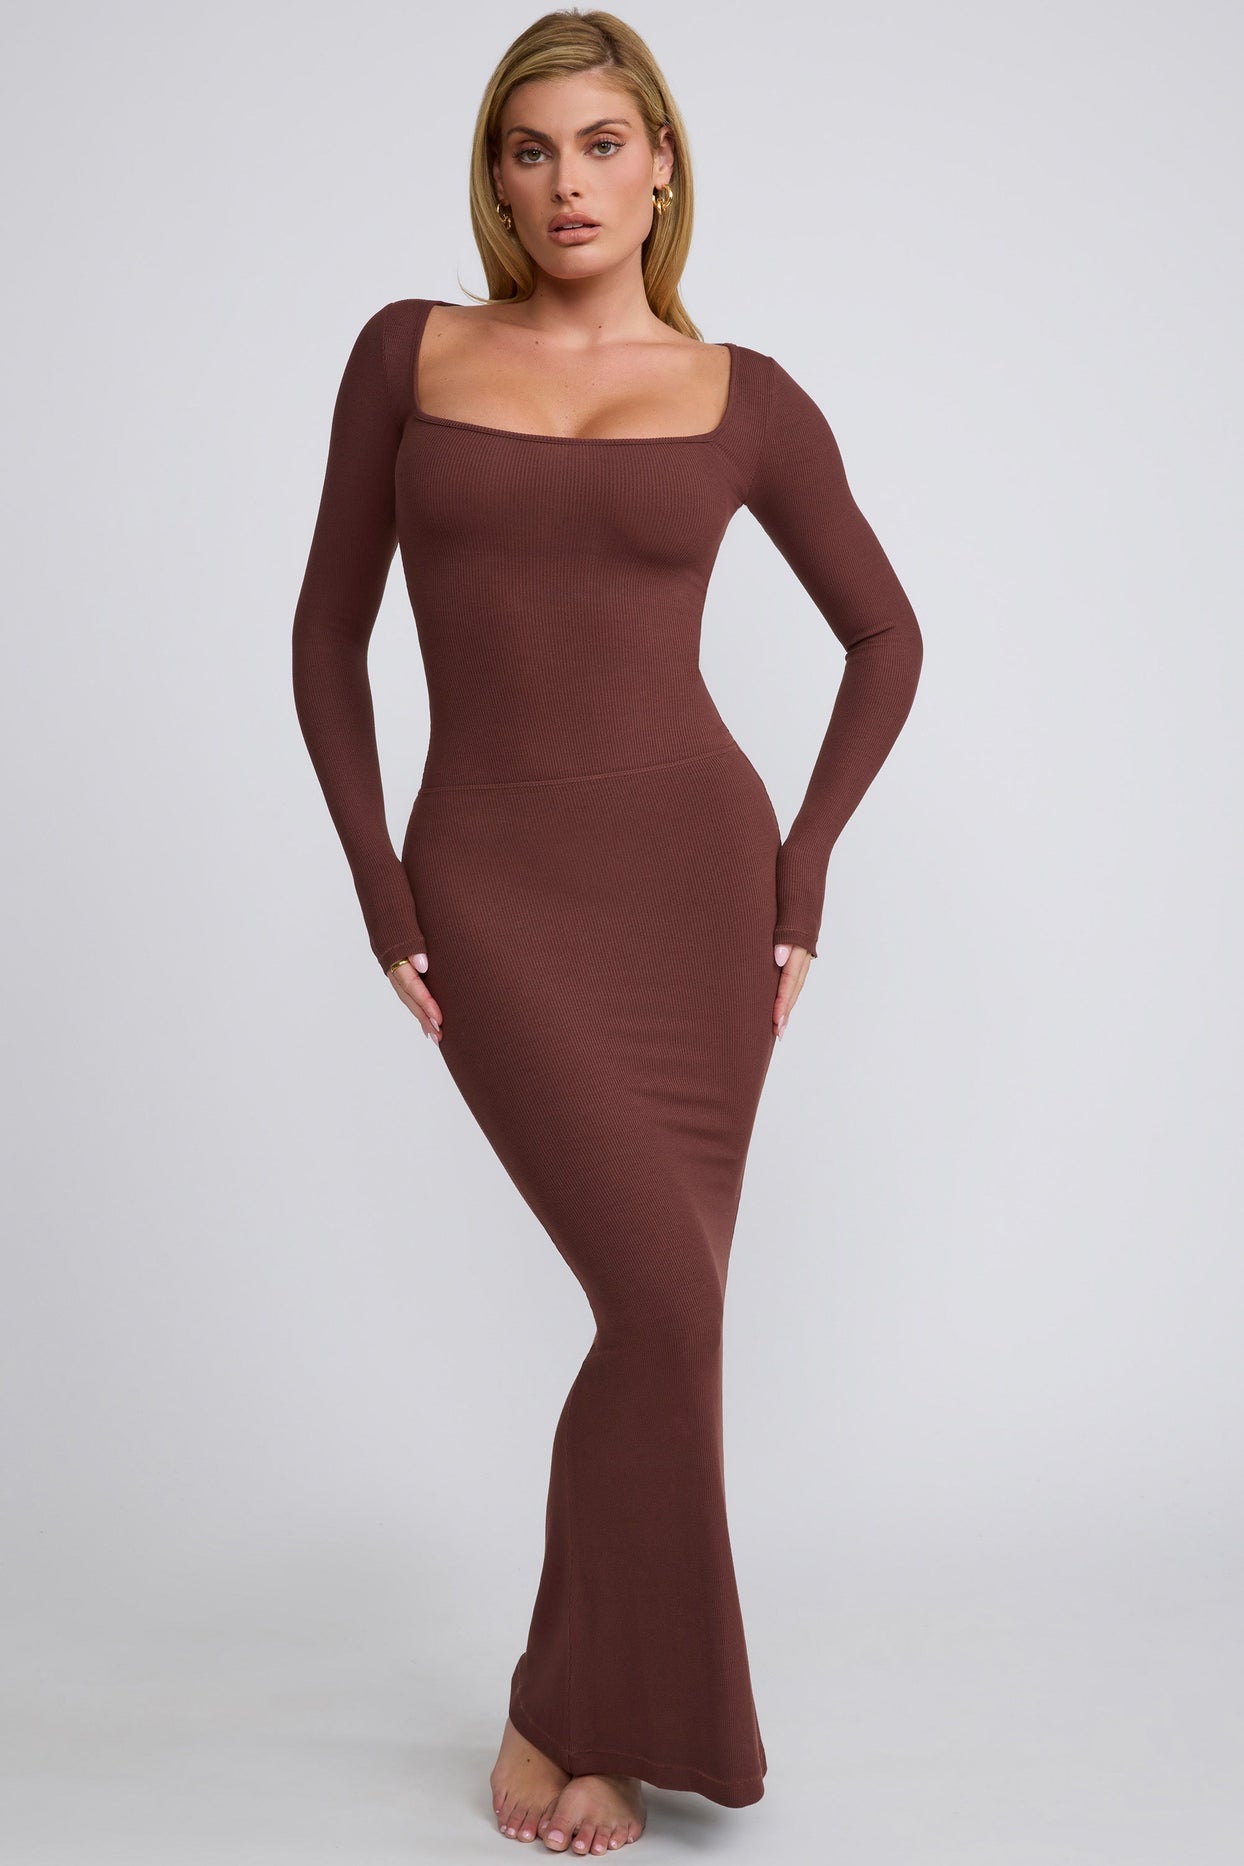 Ribbed Modal Mid Rise Maxi Skirt in Chocolate